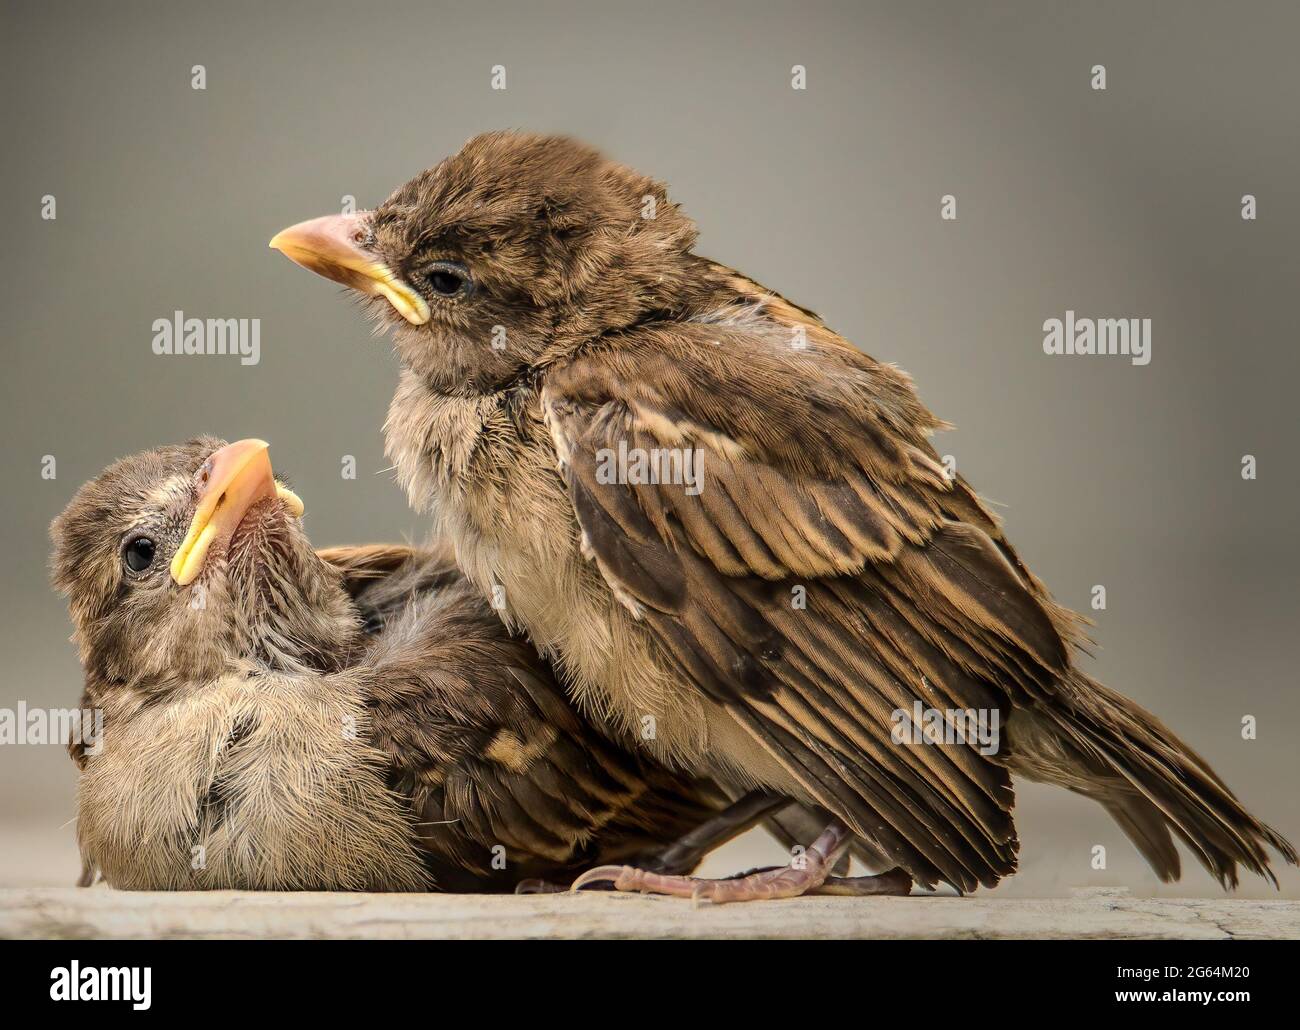 Closeup of two young finch birds outdoors, humorously looking at each other. Stock Photo